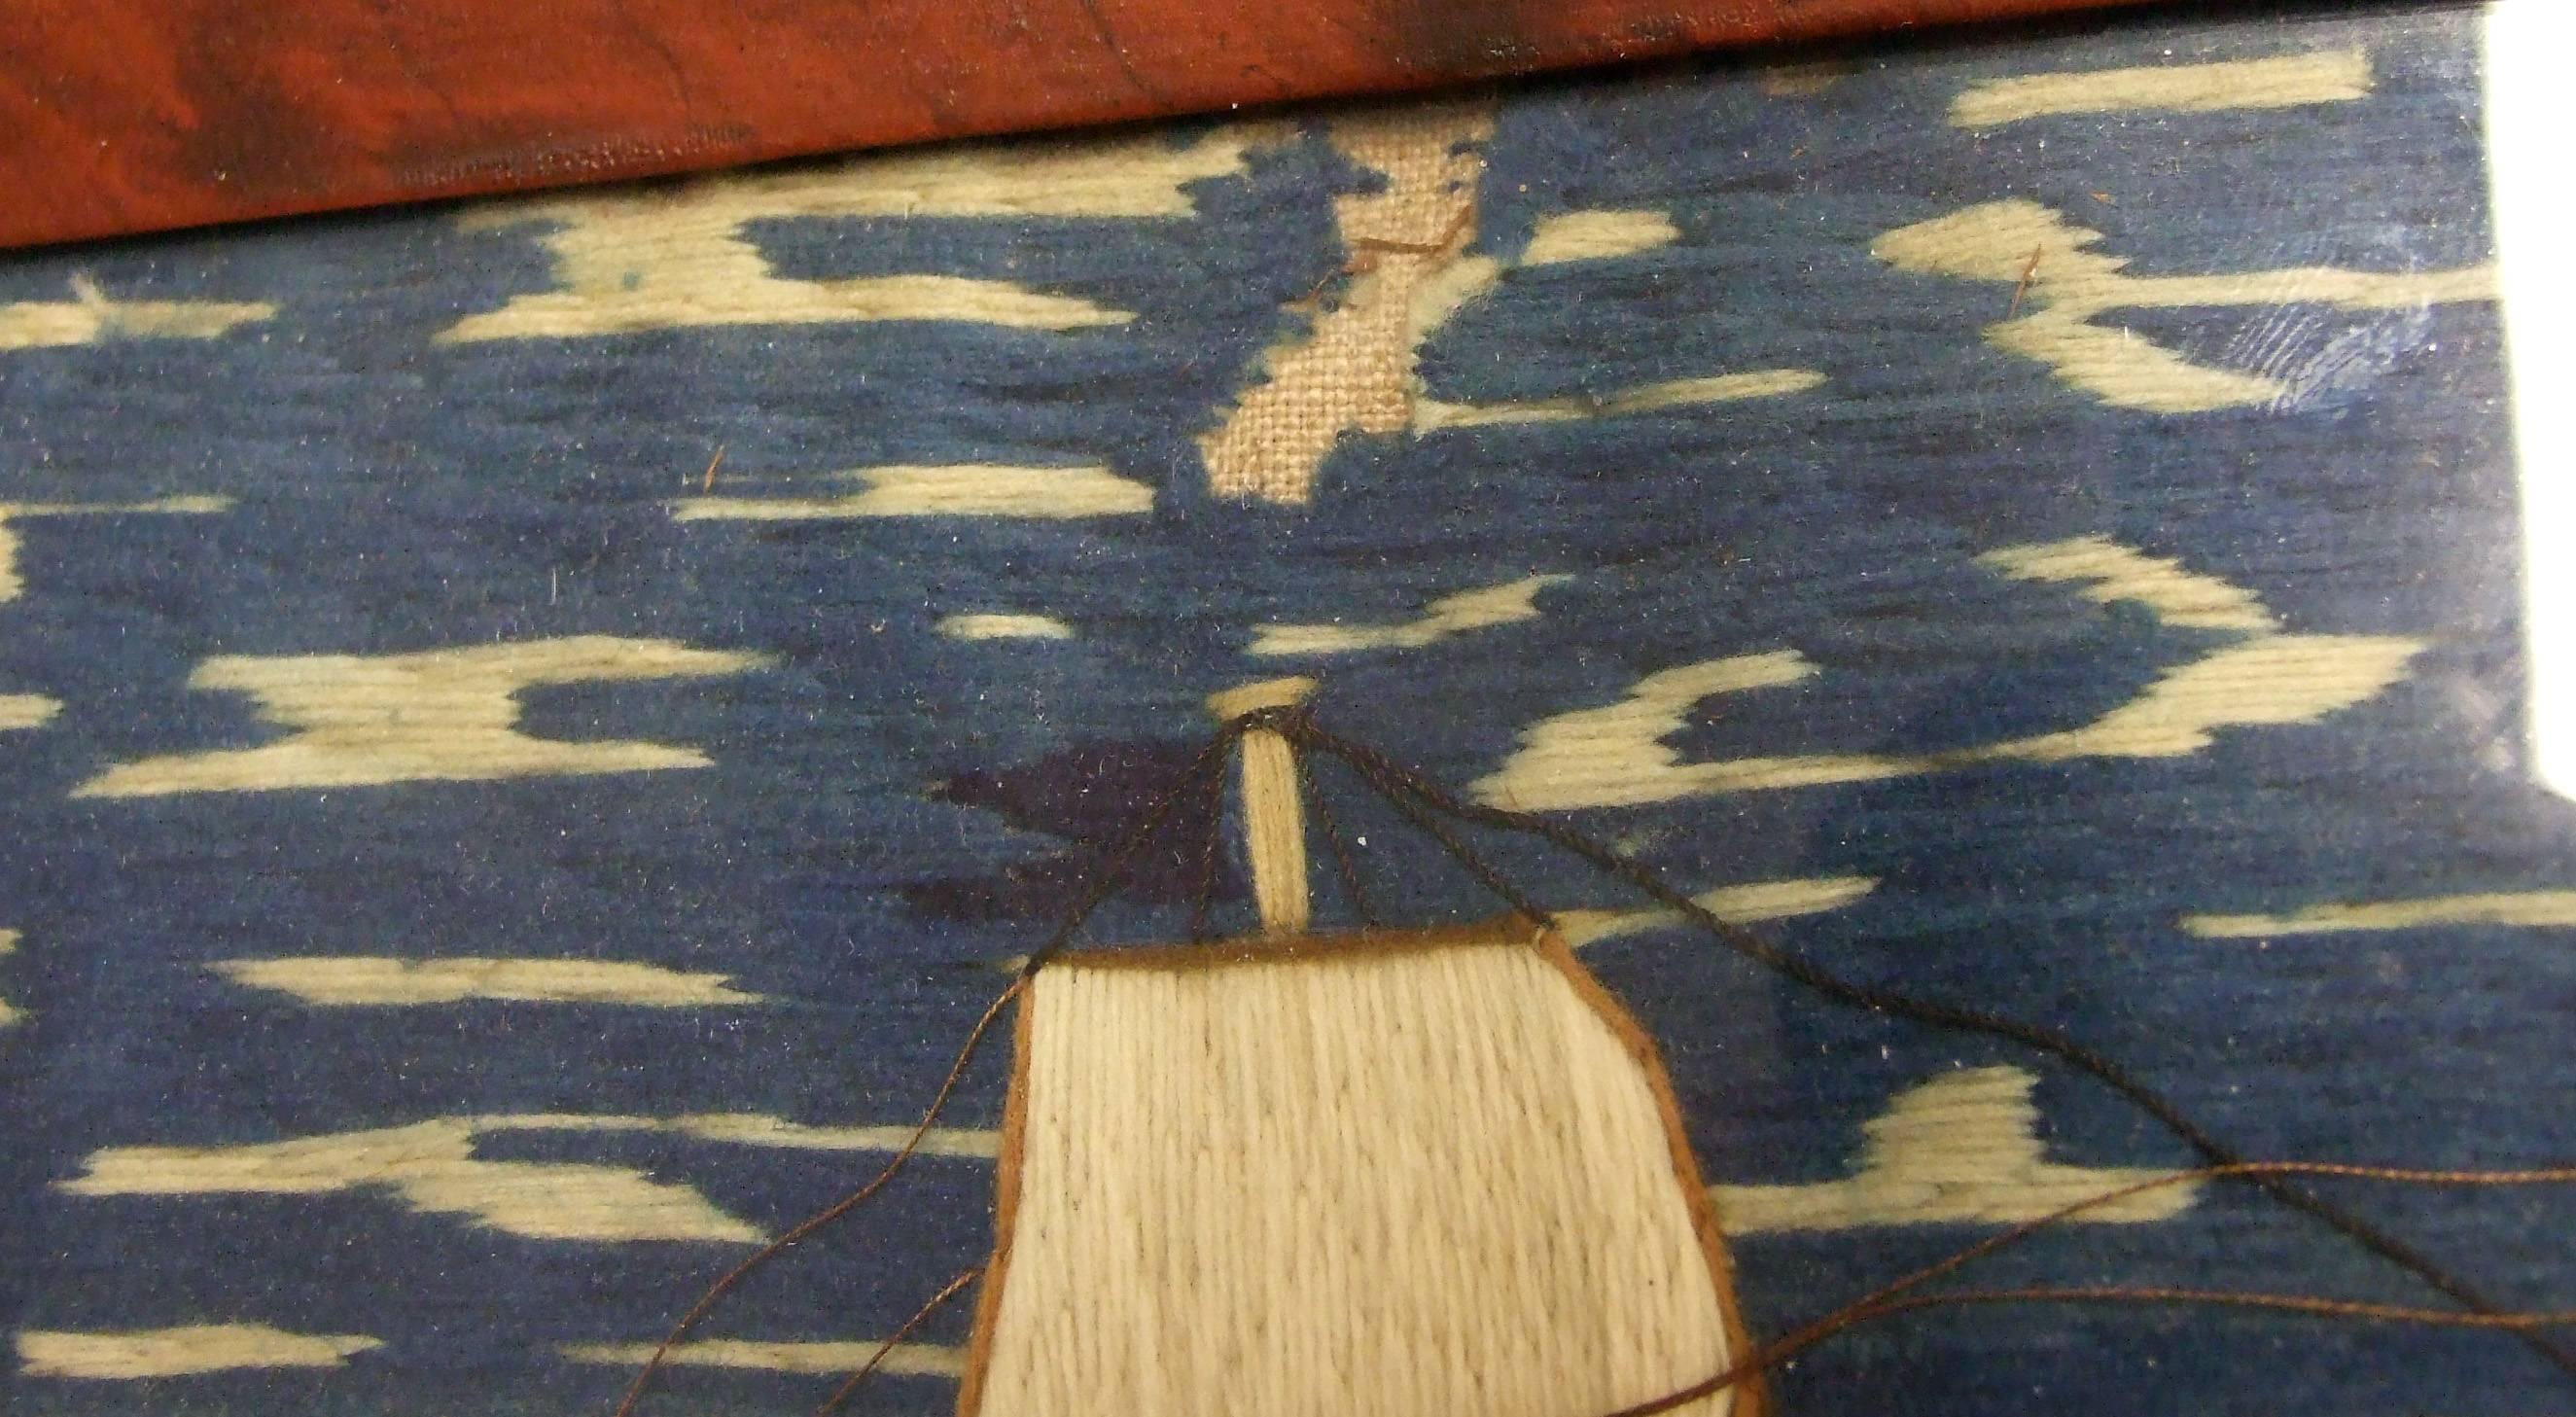 Sailor's woolwork of HMS Nankin,
Berlin wool on linen,
circa 1865.

A lovely sailor's woolwork or woolie picture depicting the 4th Rate HMS Nankin under full sail flying the blue ensign as she passes a fortification flying the Union Jack and an